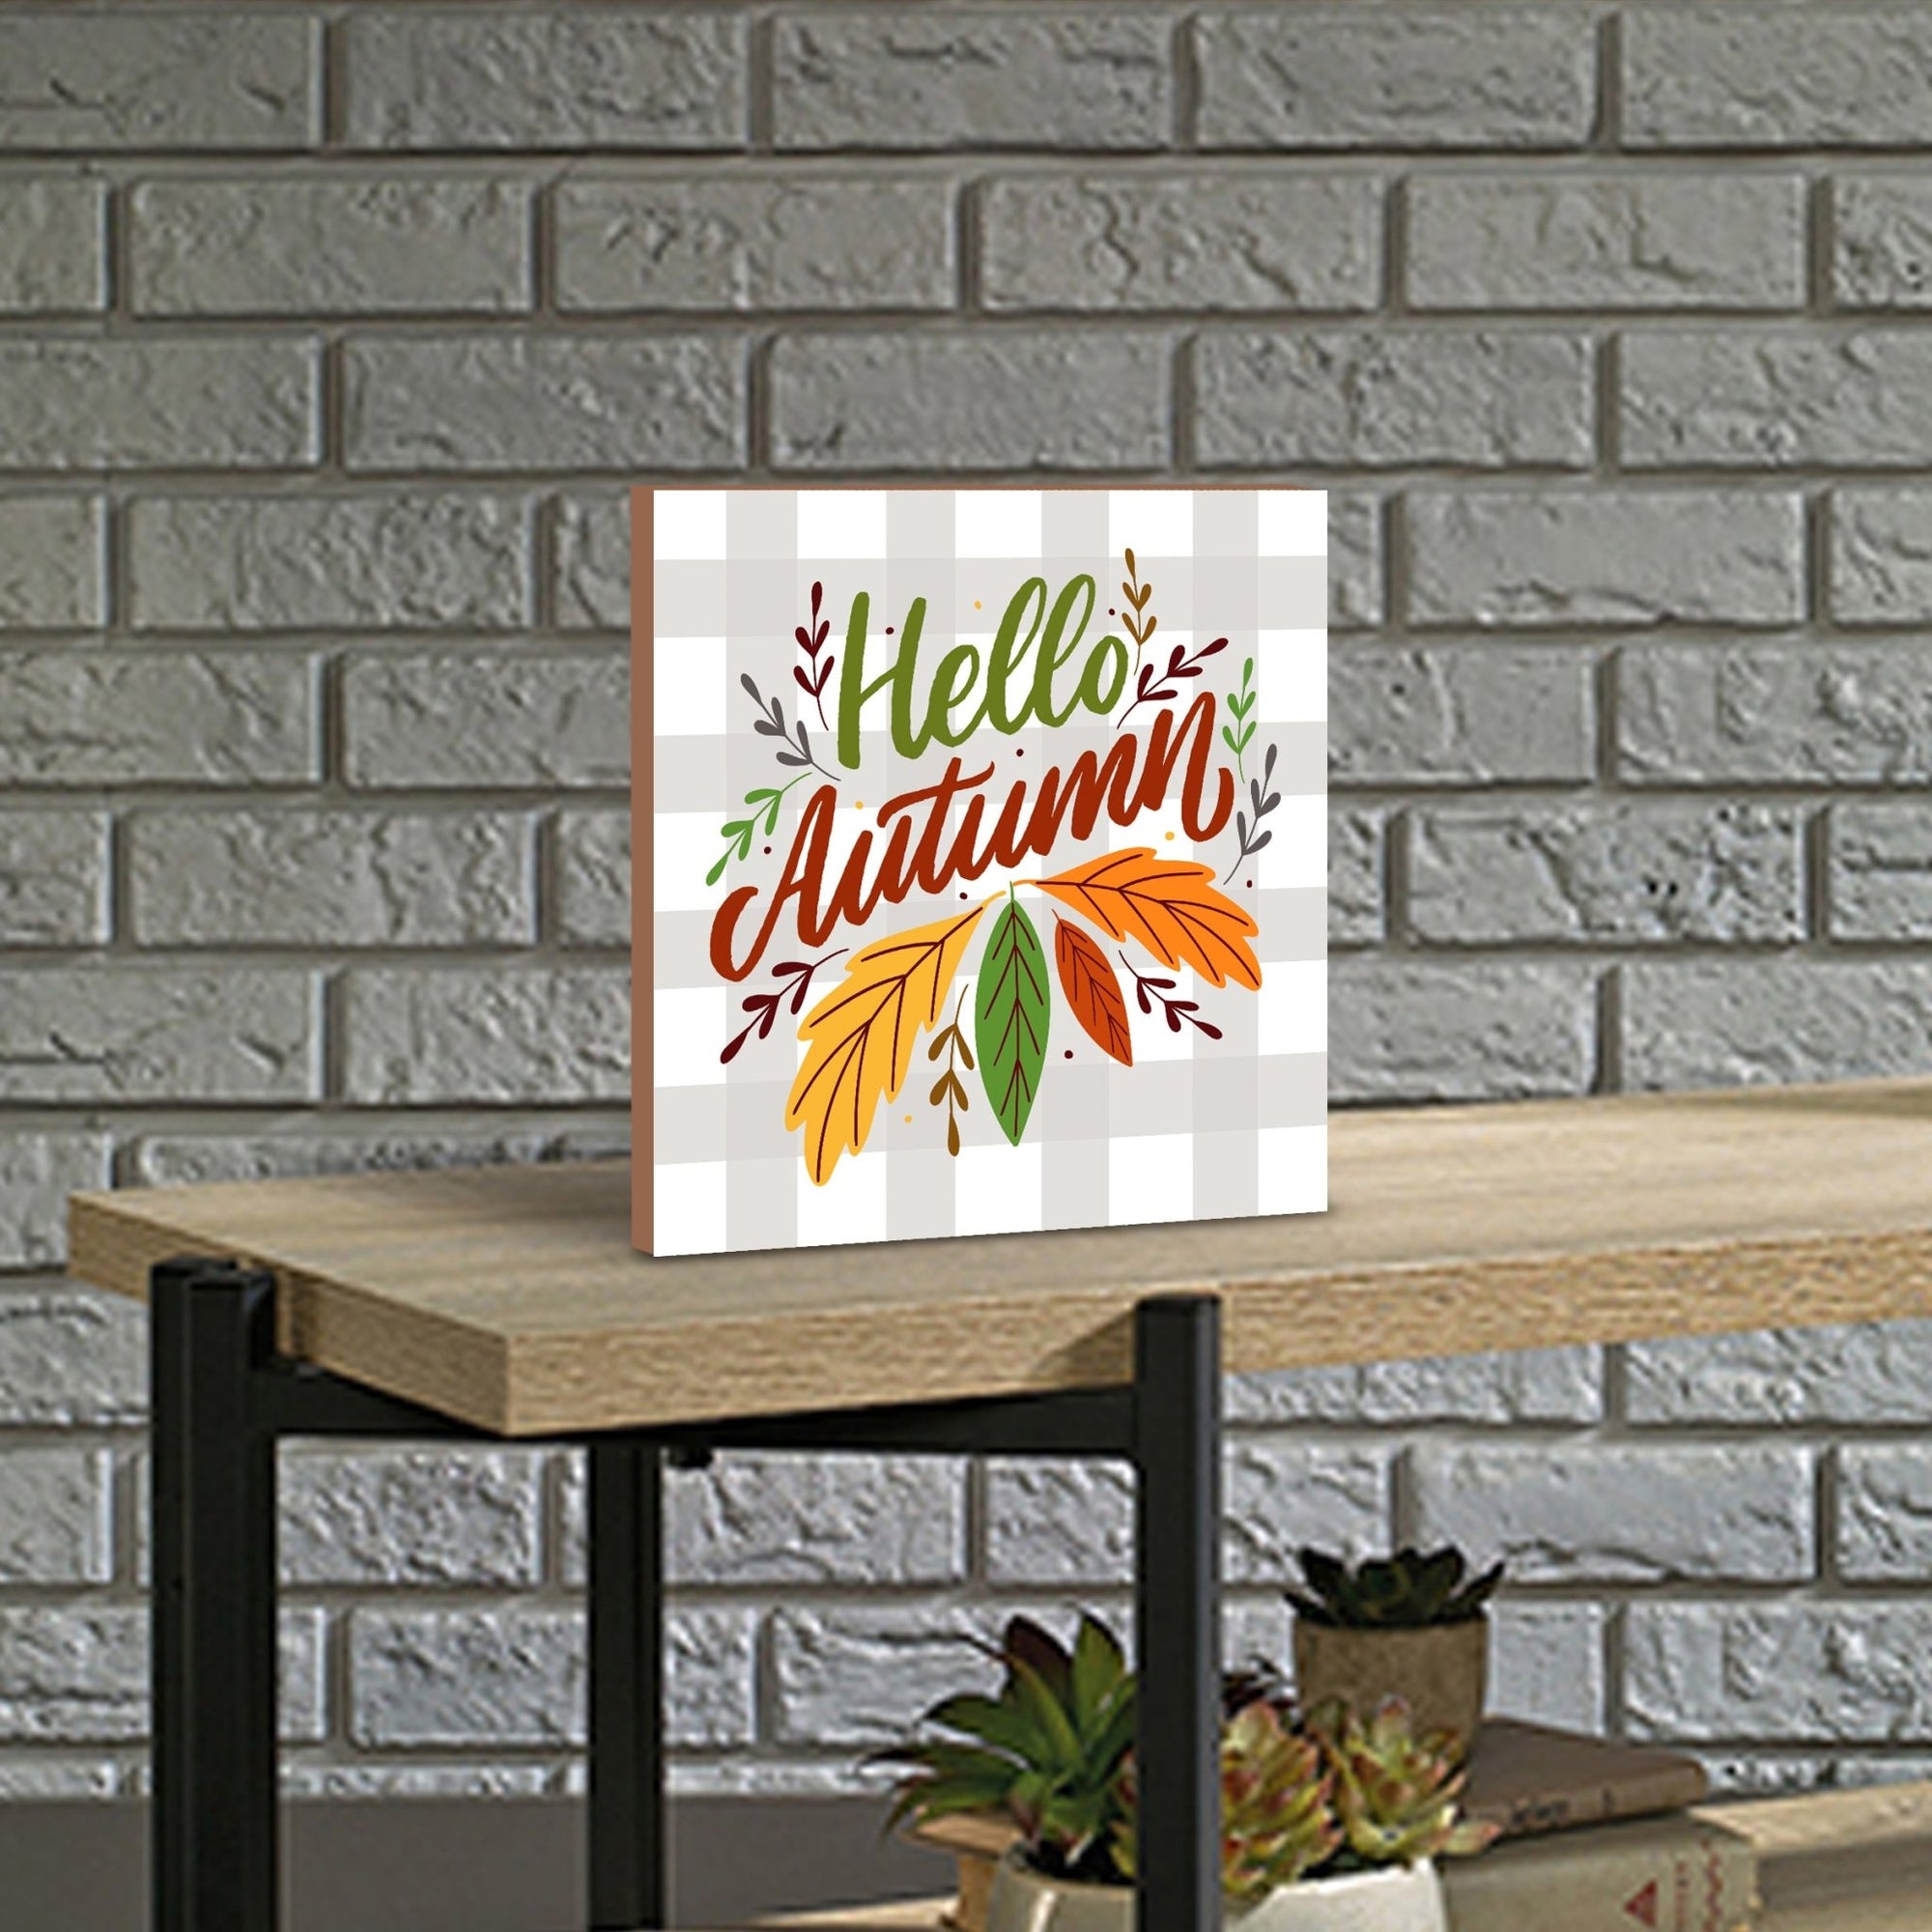 Fall tabletop decor that adds warmth and character to your living space, mixing modern and rustic elements